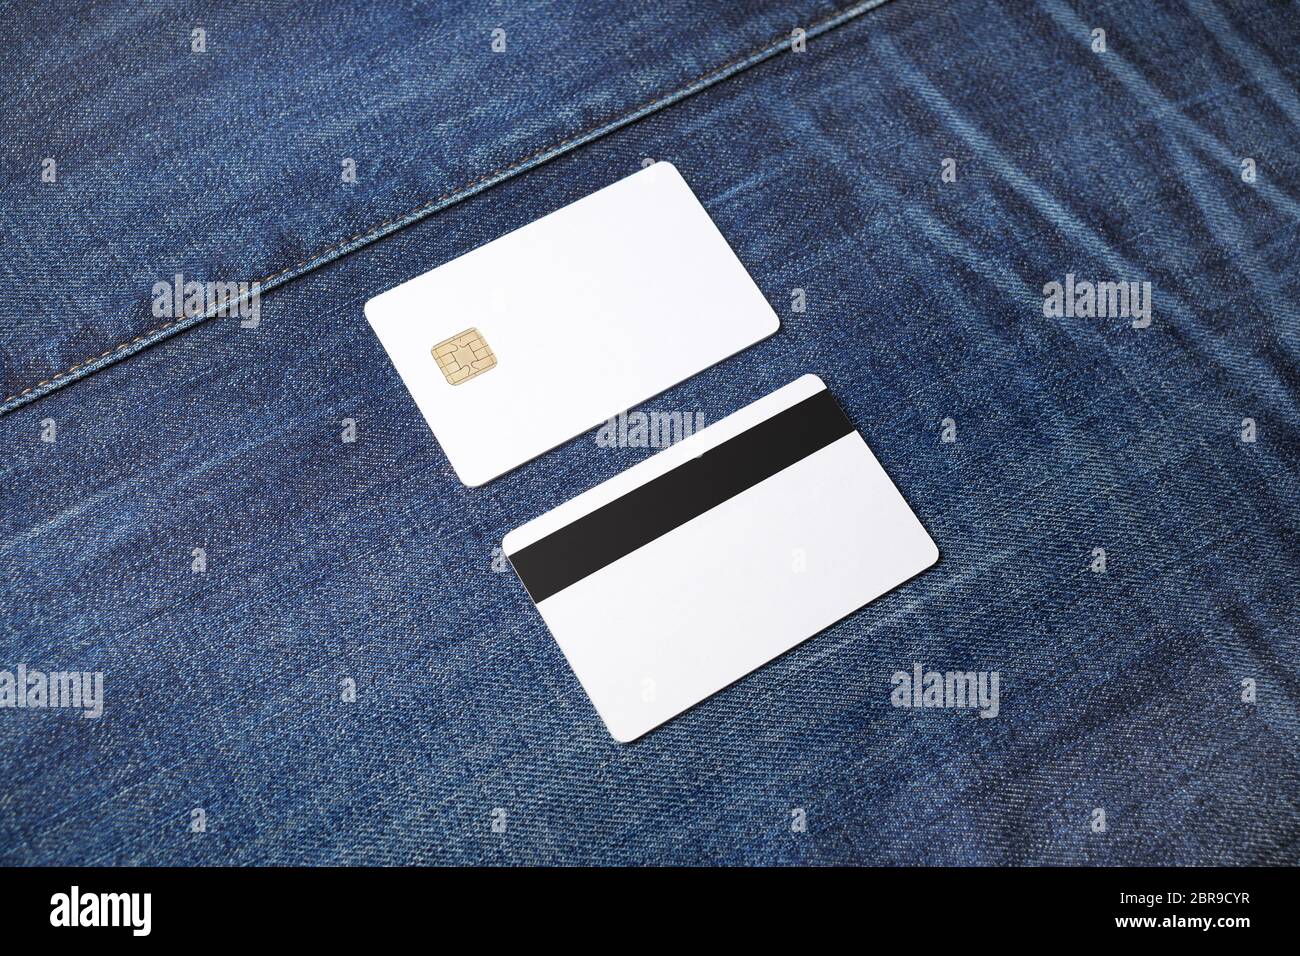 Blank chip cards on denim background. Two credit cards. Front and back view. Stock Photo